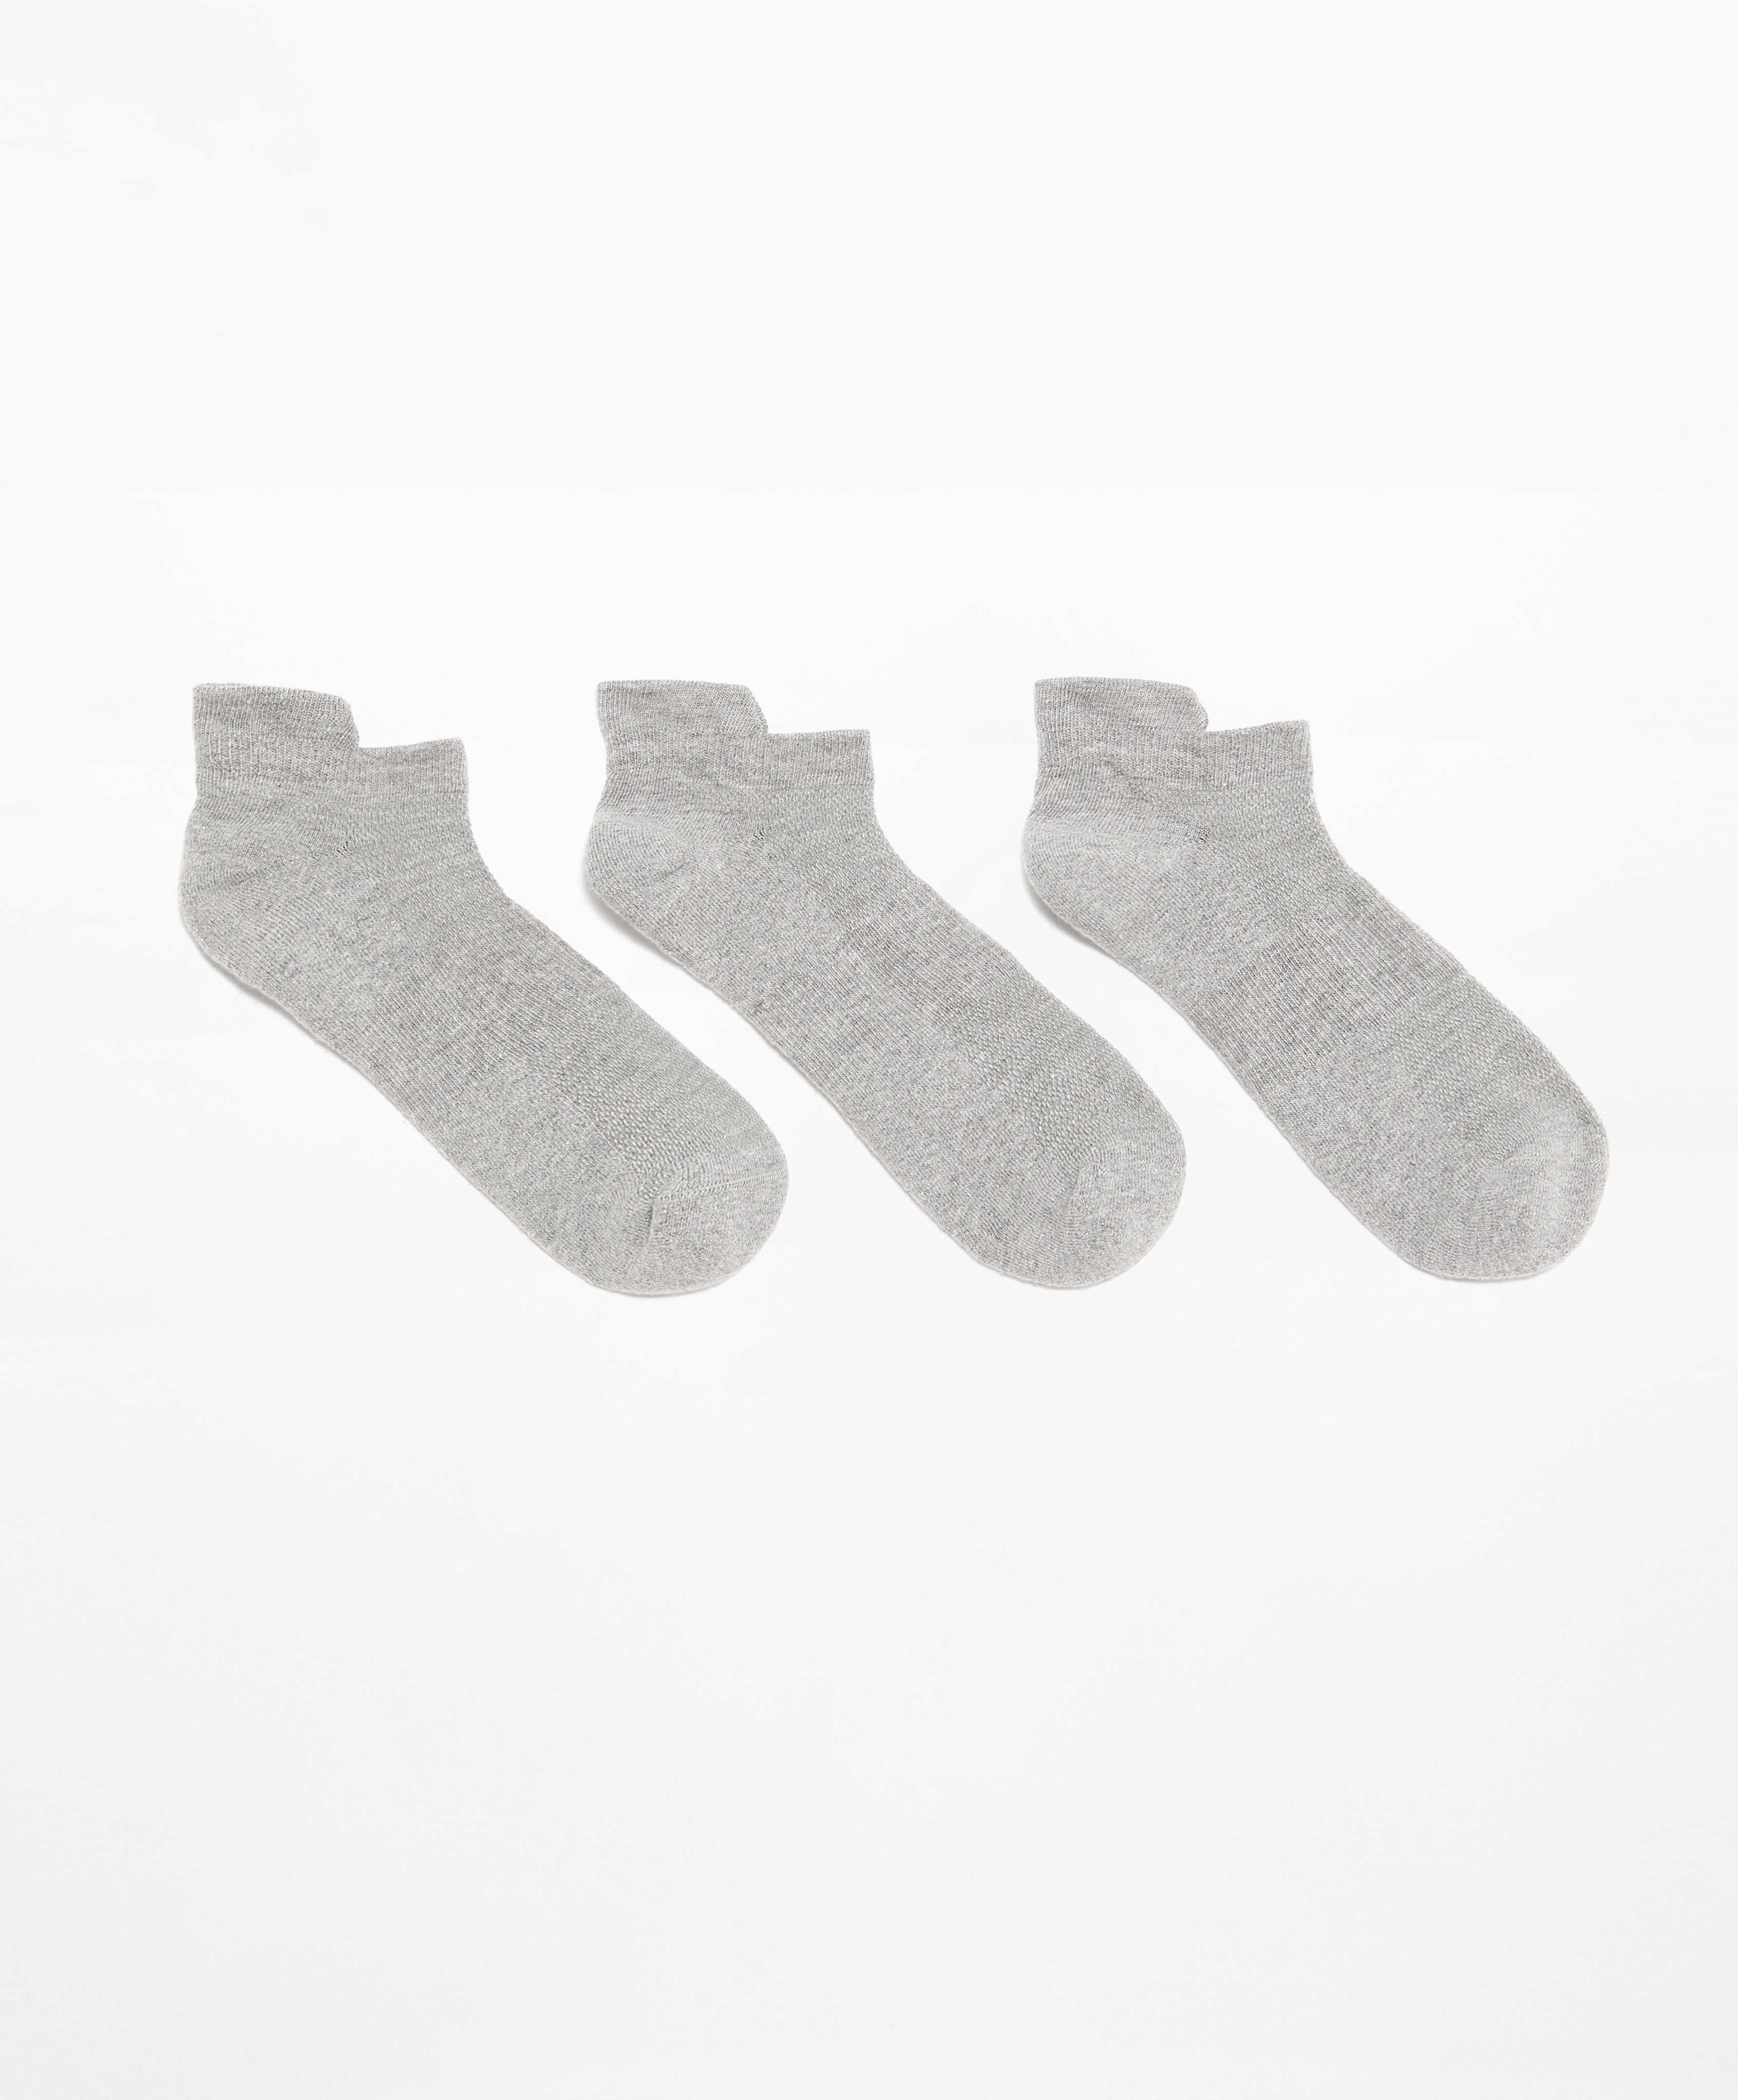 3 pairs of tab sports sneaker socks with cotton